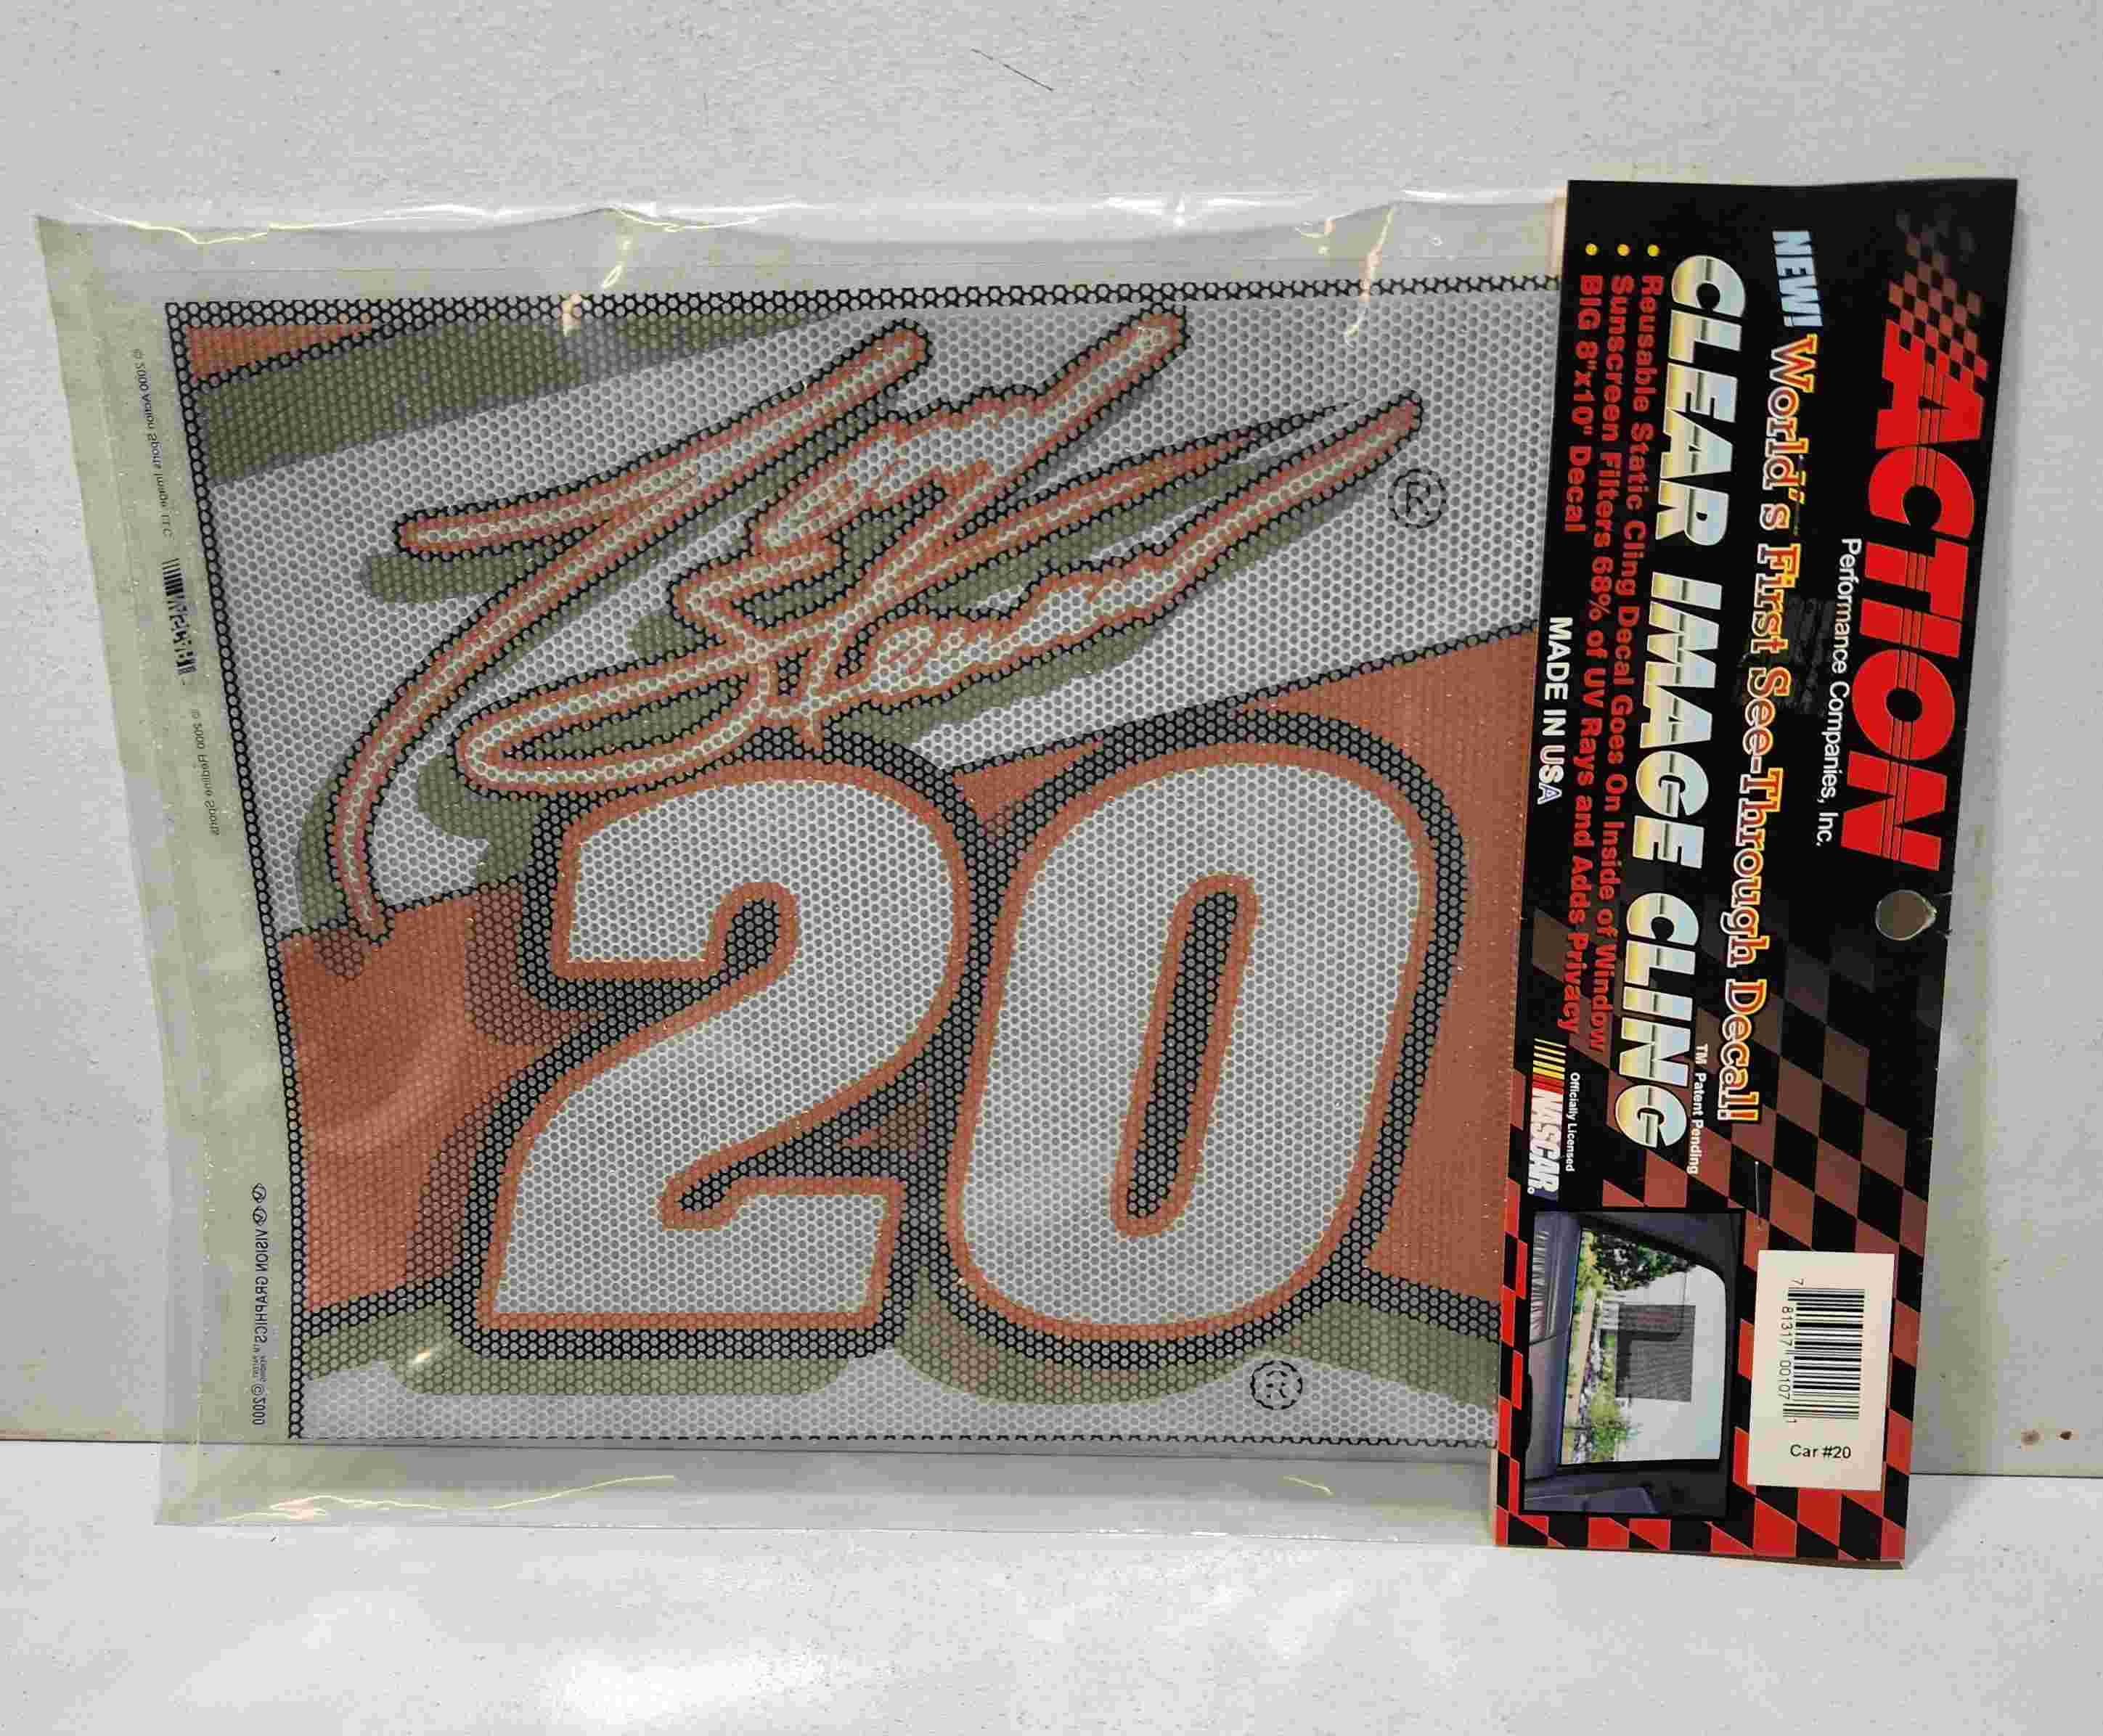 2000 Tony Stewart #20 Clear Image Cling